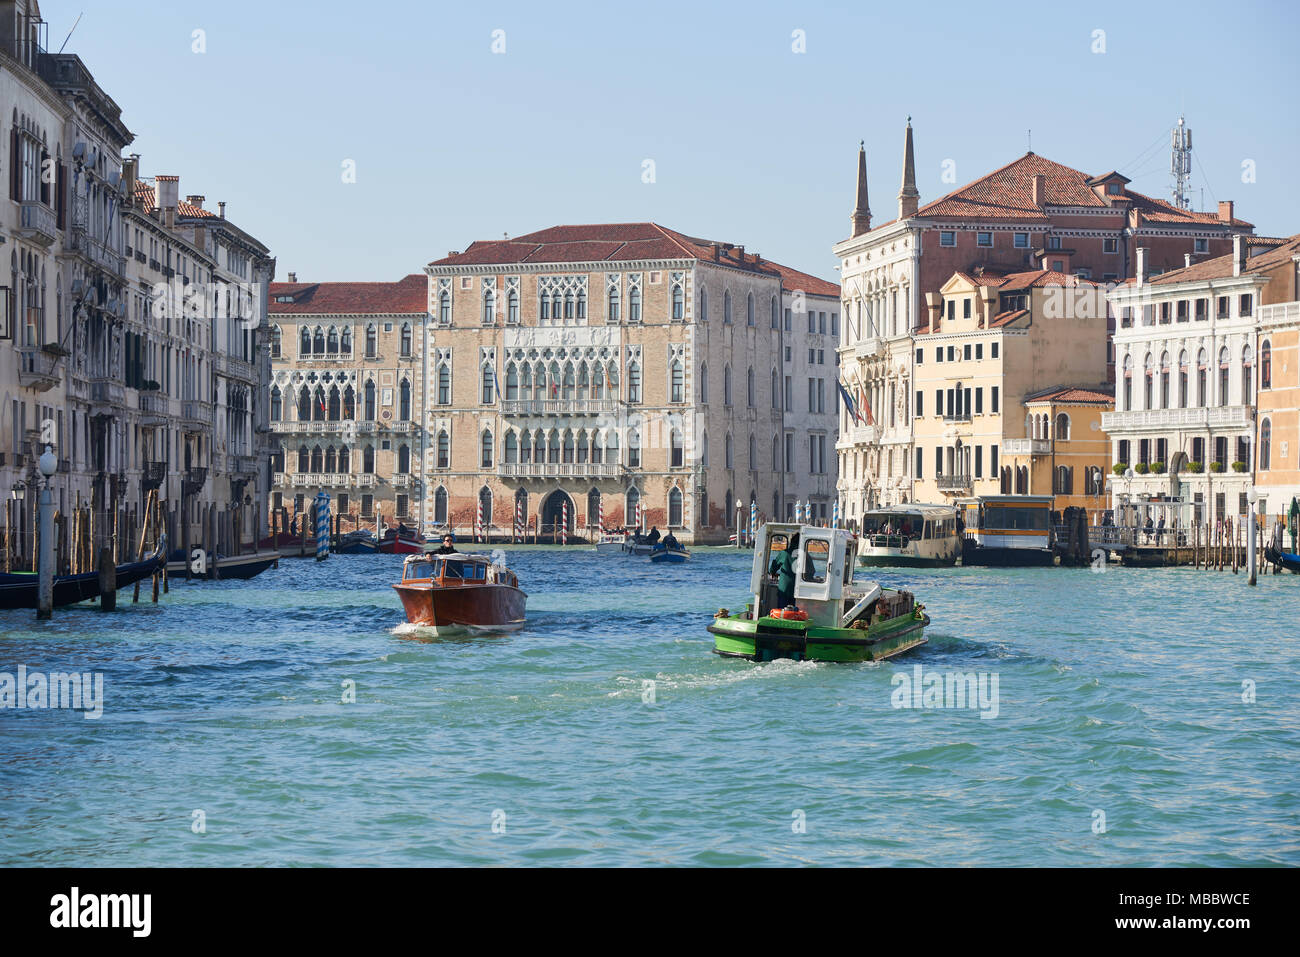 Venice, Italy - Febuary 19, 2016: Venice, a city in northeastern italy. It is famous for the beauty of its settings, archtecture and artwork. A part o Stock Photo